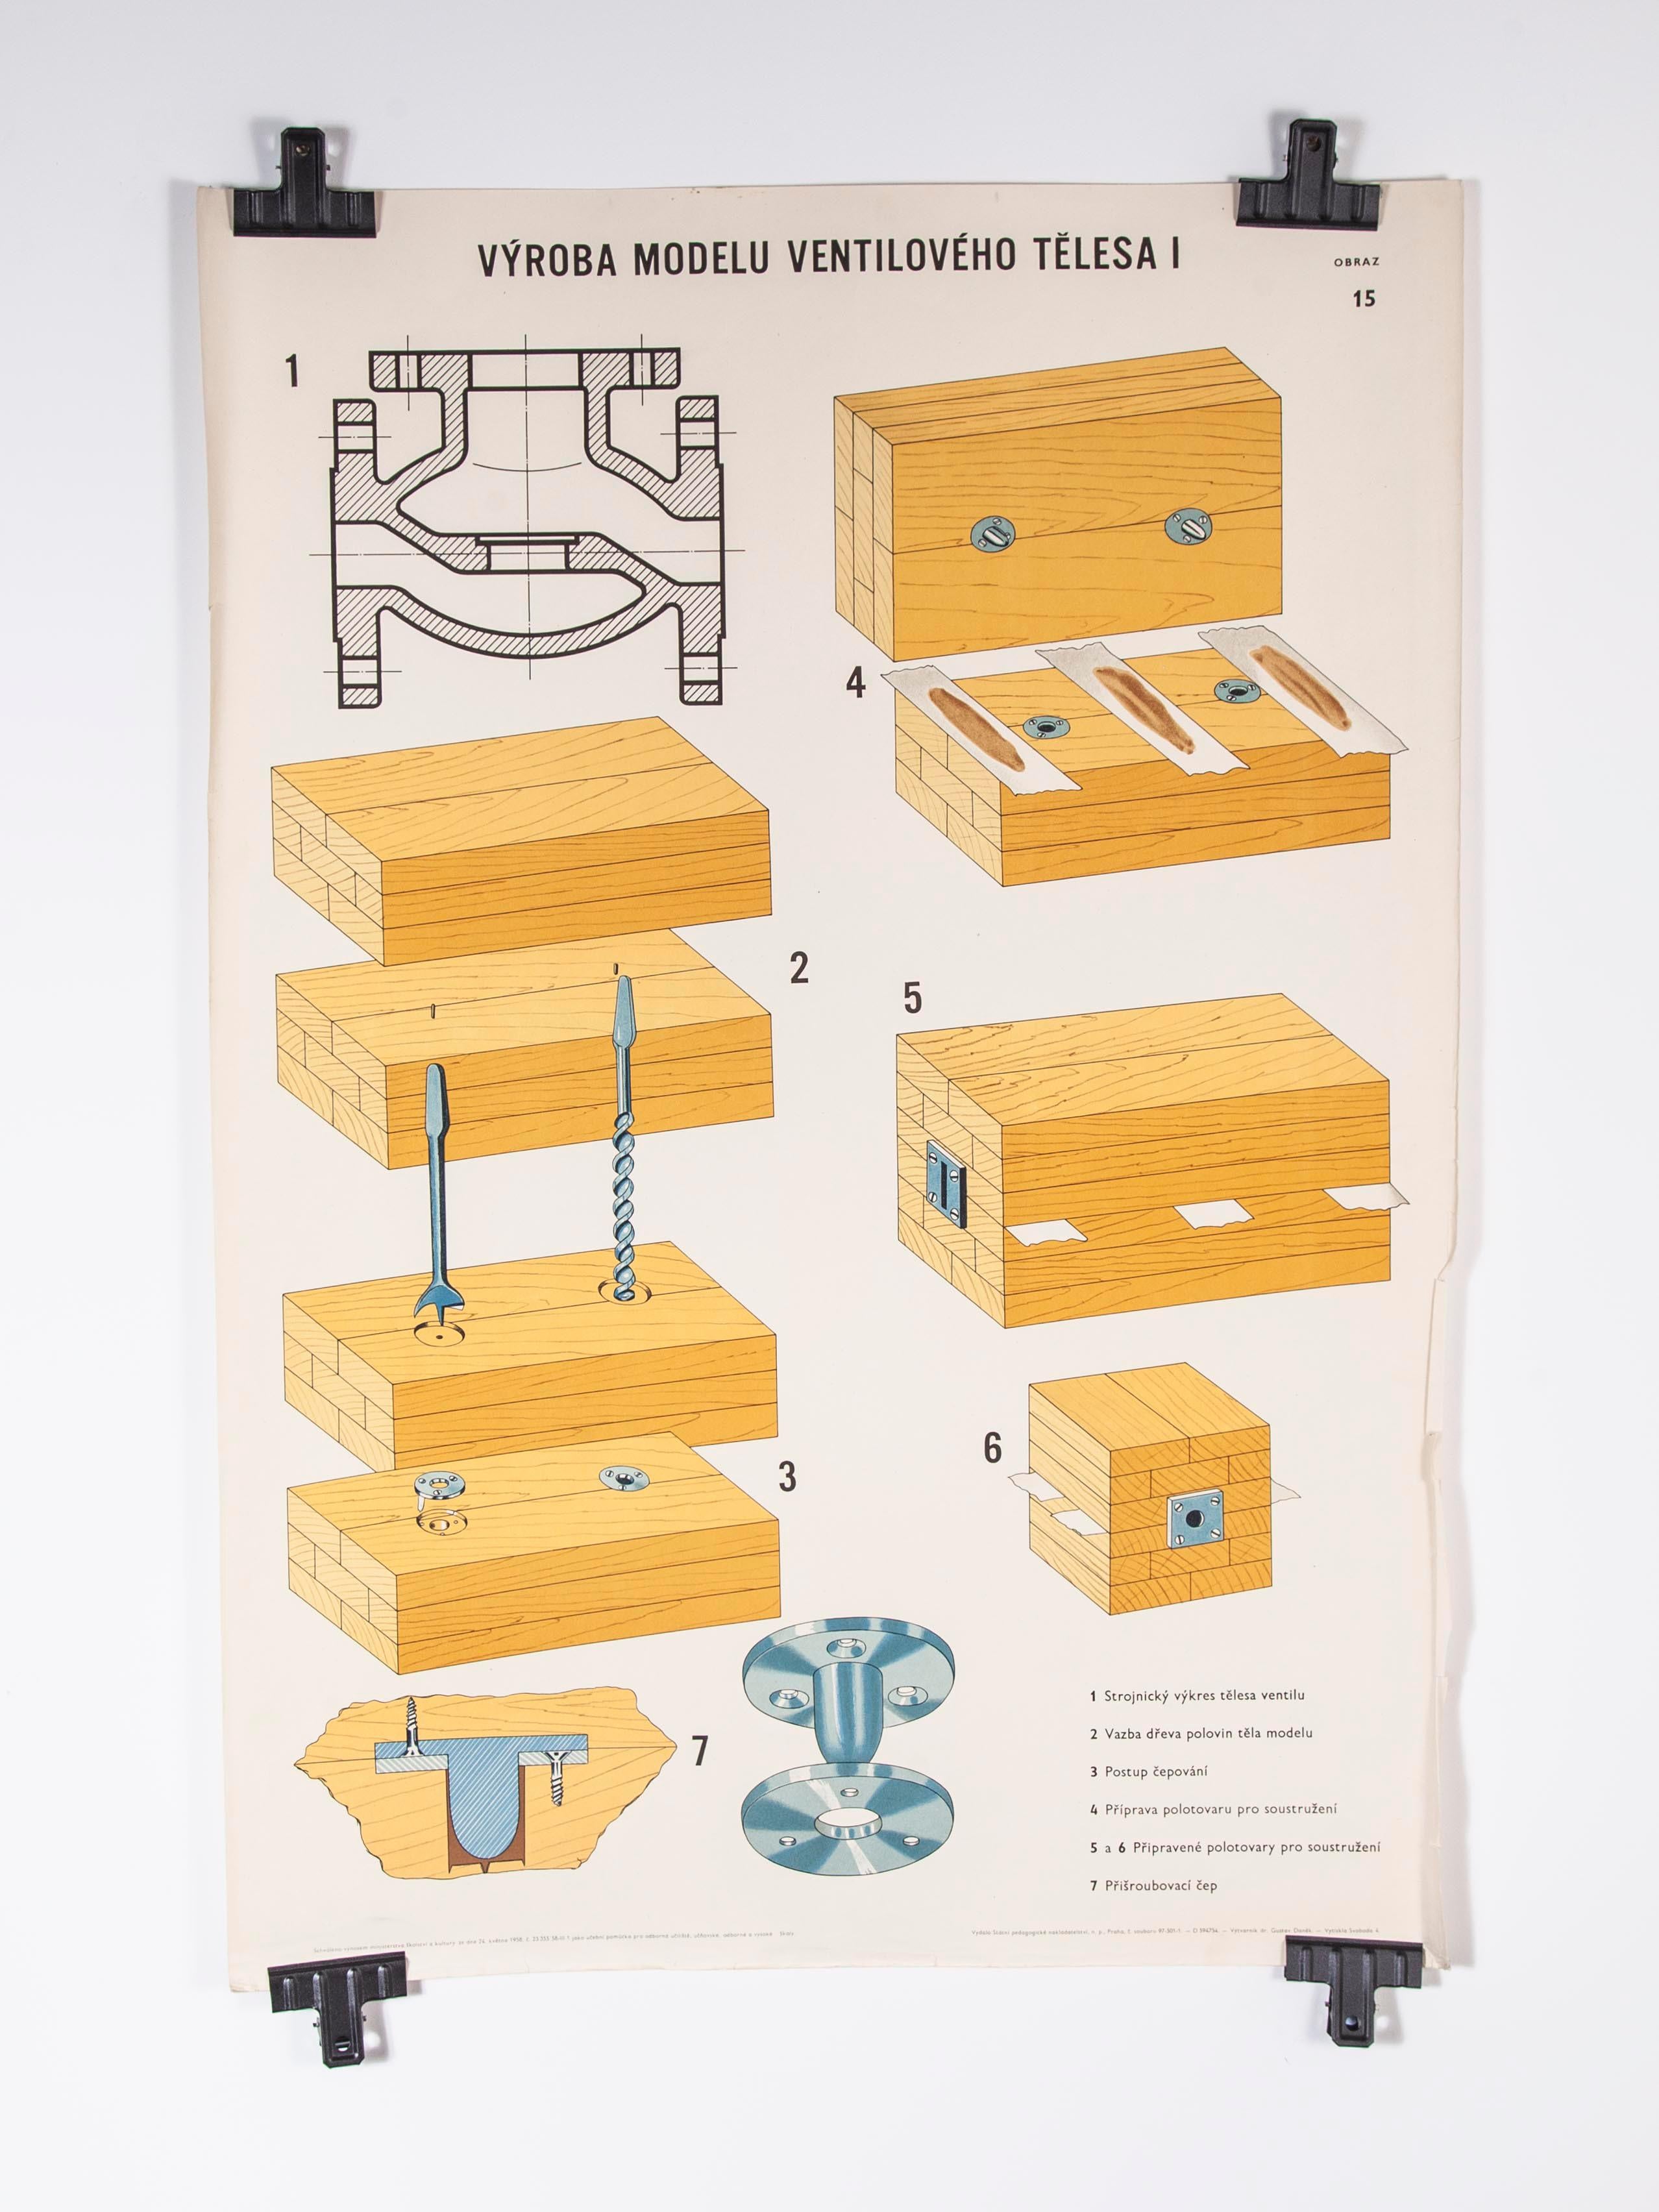 Czech technical Industrial drawing – foundry mould engineering poster – 14

Sourced from an old engineering workshop in the Czech Republic, an amazing series of technical Industrial drawings explaining the process of sand casting and creating the